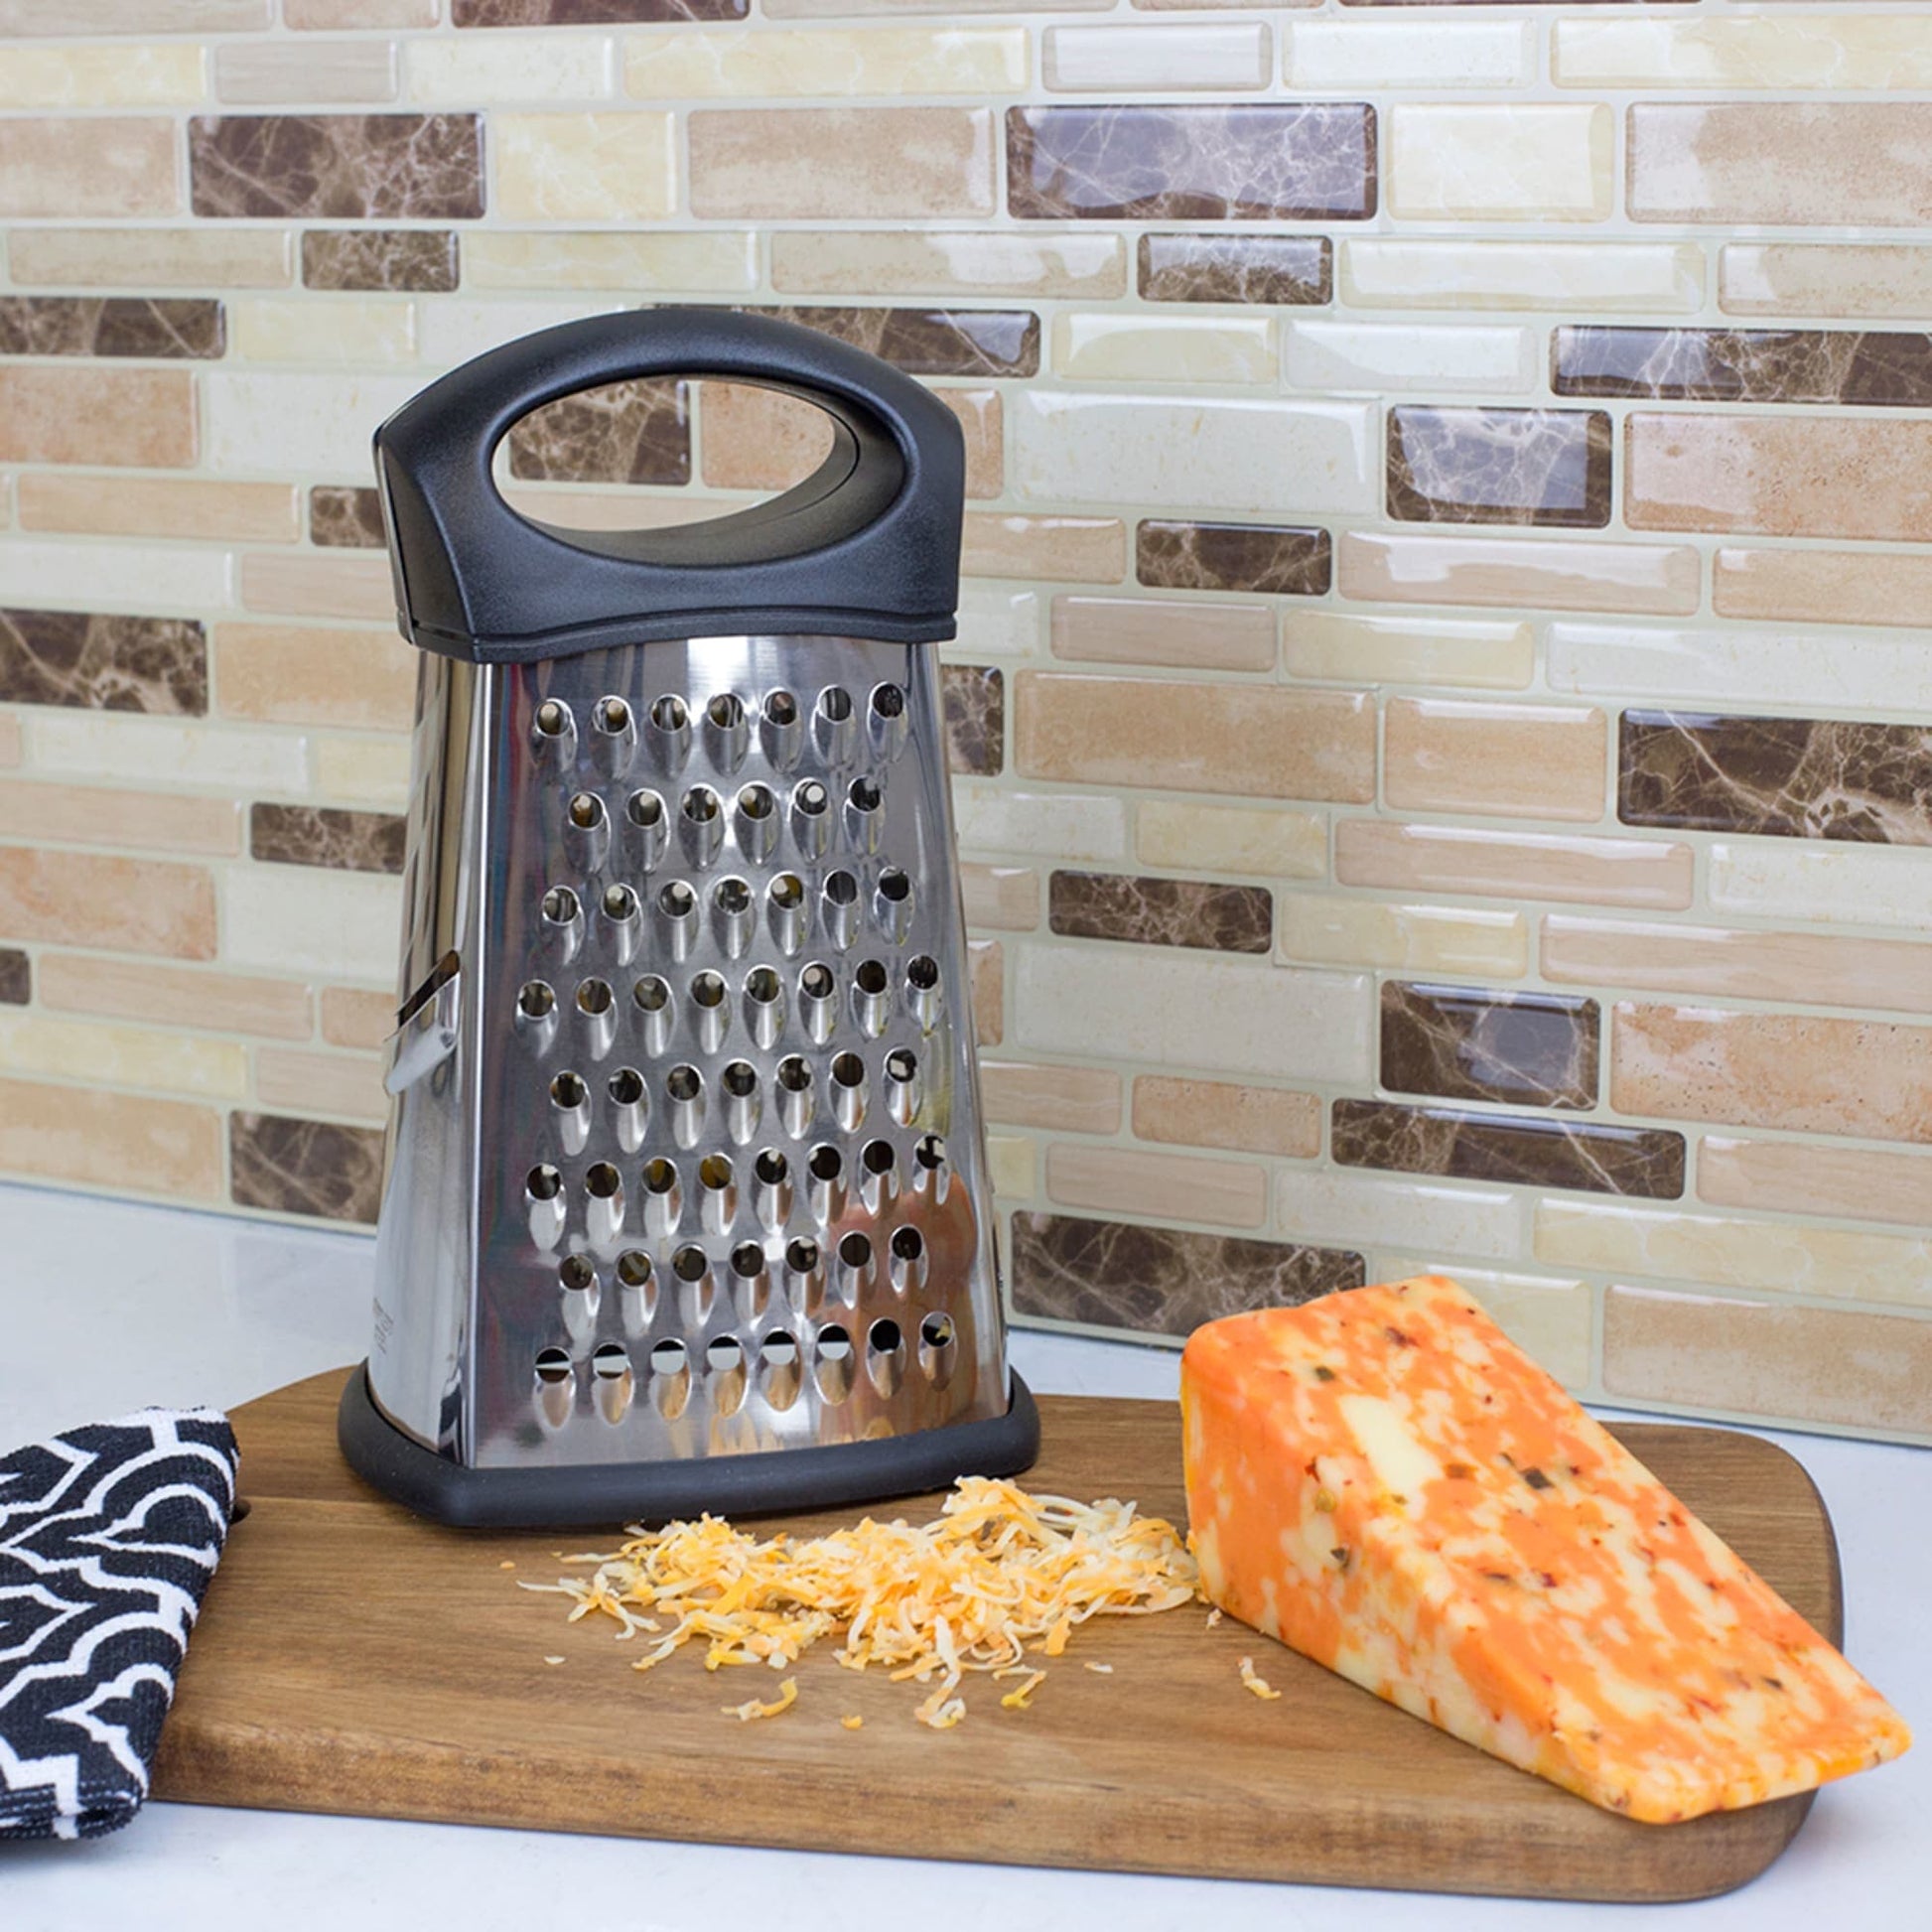 10 4-Sided Stainless Steel Box Grater